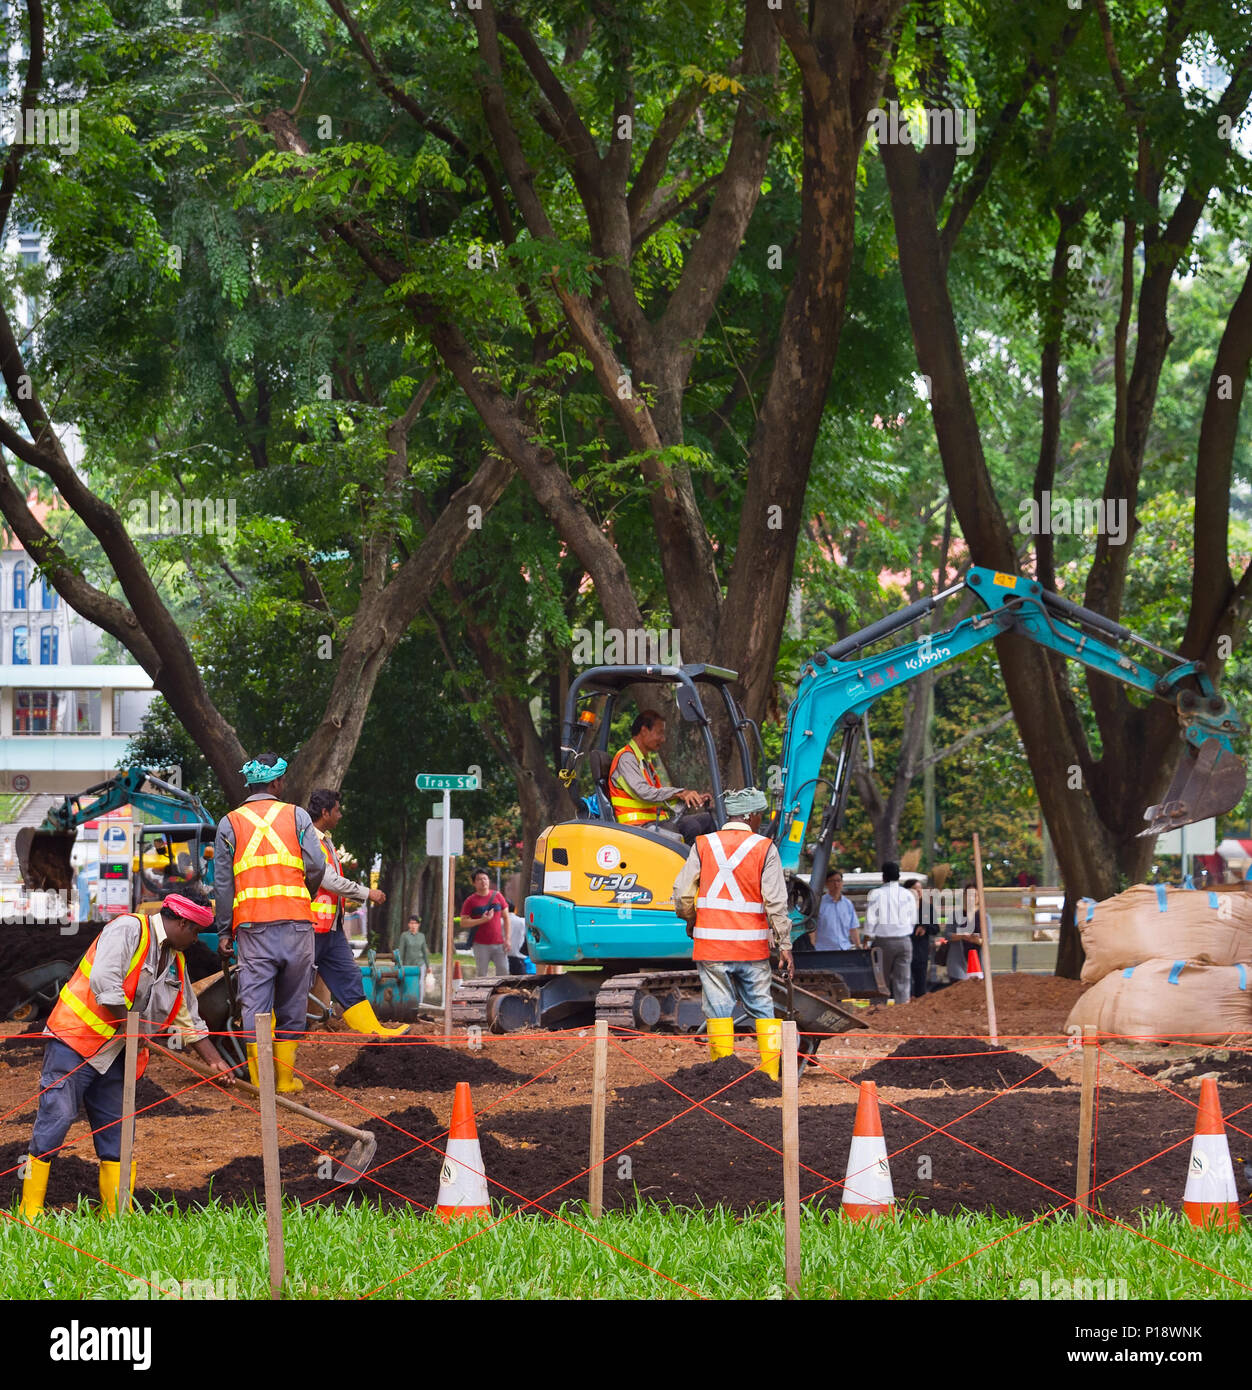 SINGAPORE - JAN 16, 2017: Workers work in public park in Singapore. Singapore is a major political, financial, cultural hub in Asia. Stock Photo